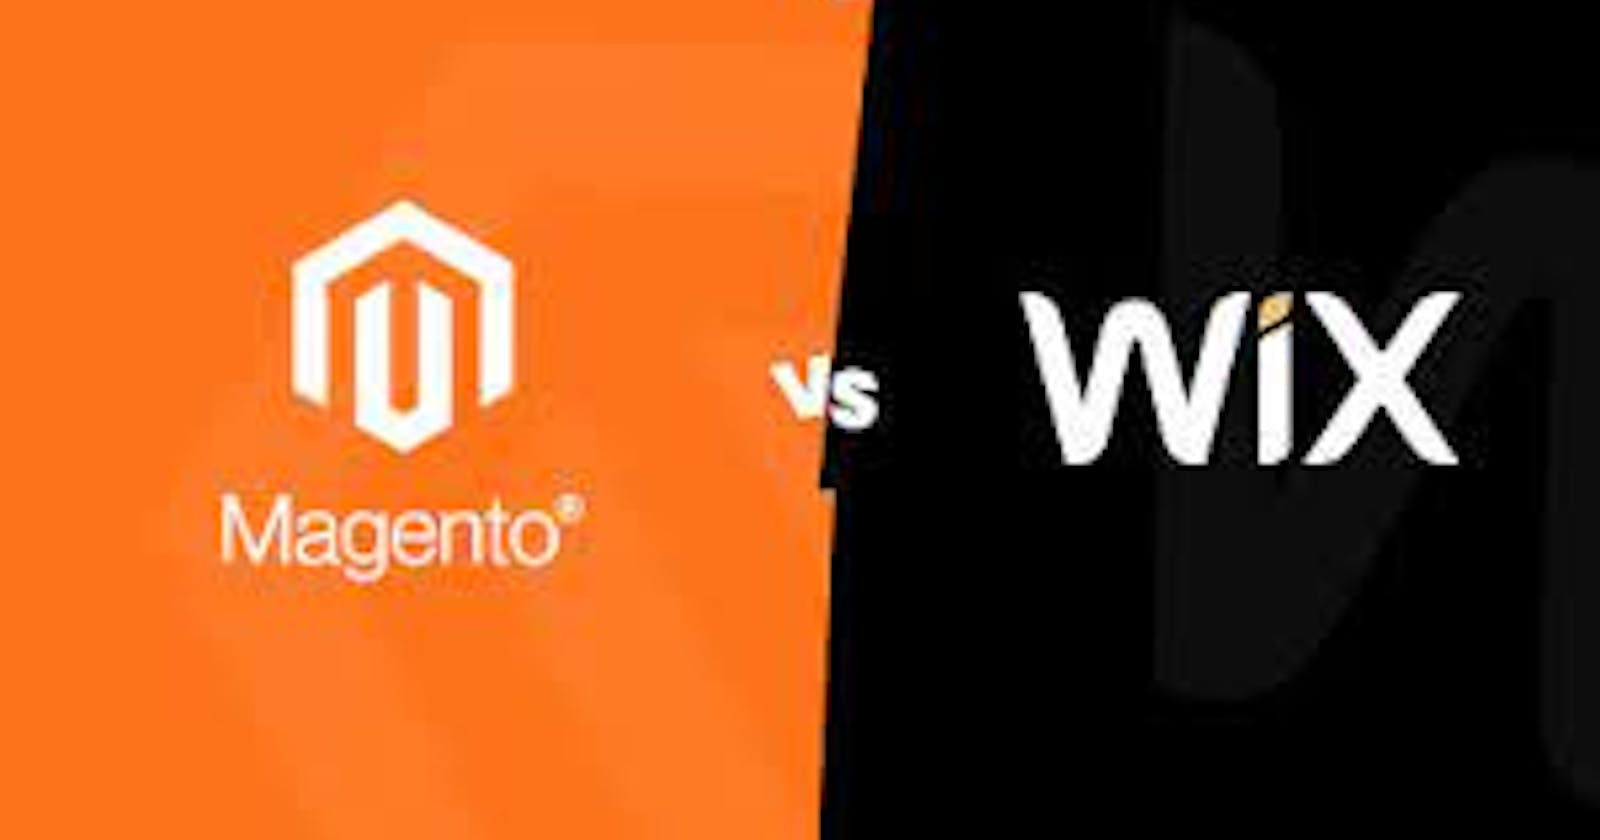 What benefits and drawbacks come with utilizing Magento? Is Magento a better option for online retailers than Shopify or Wix?